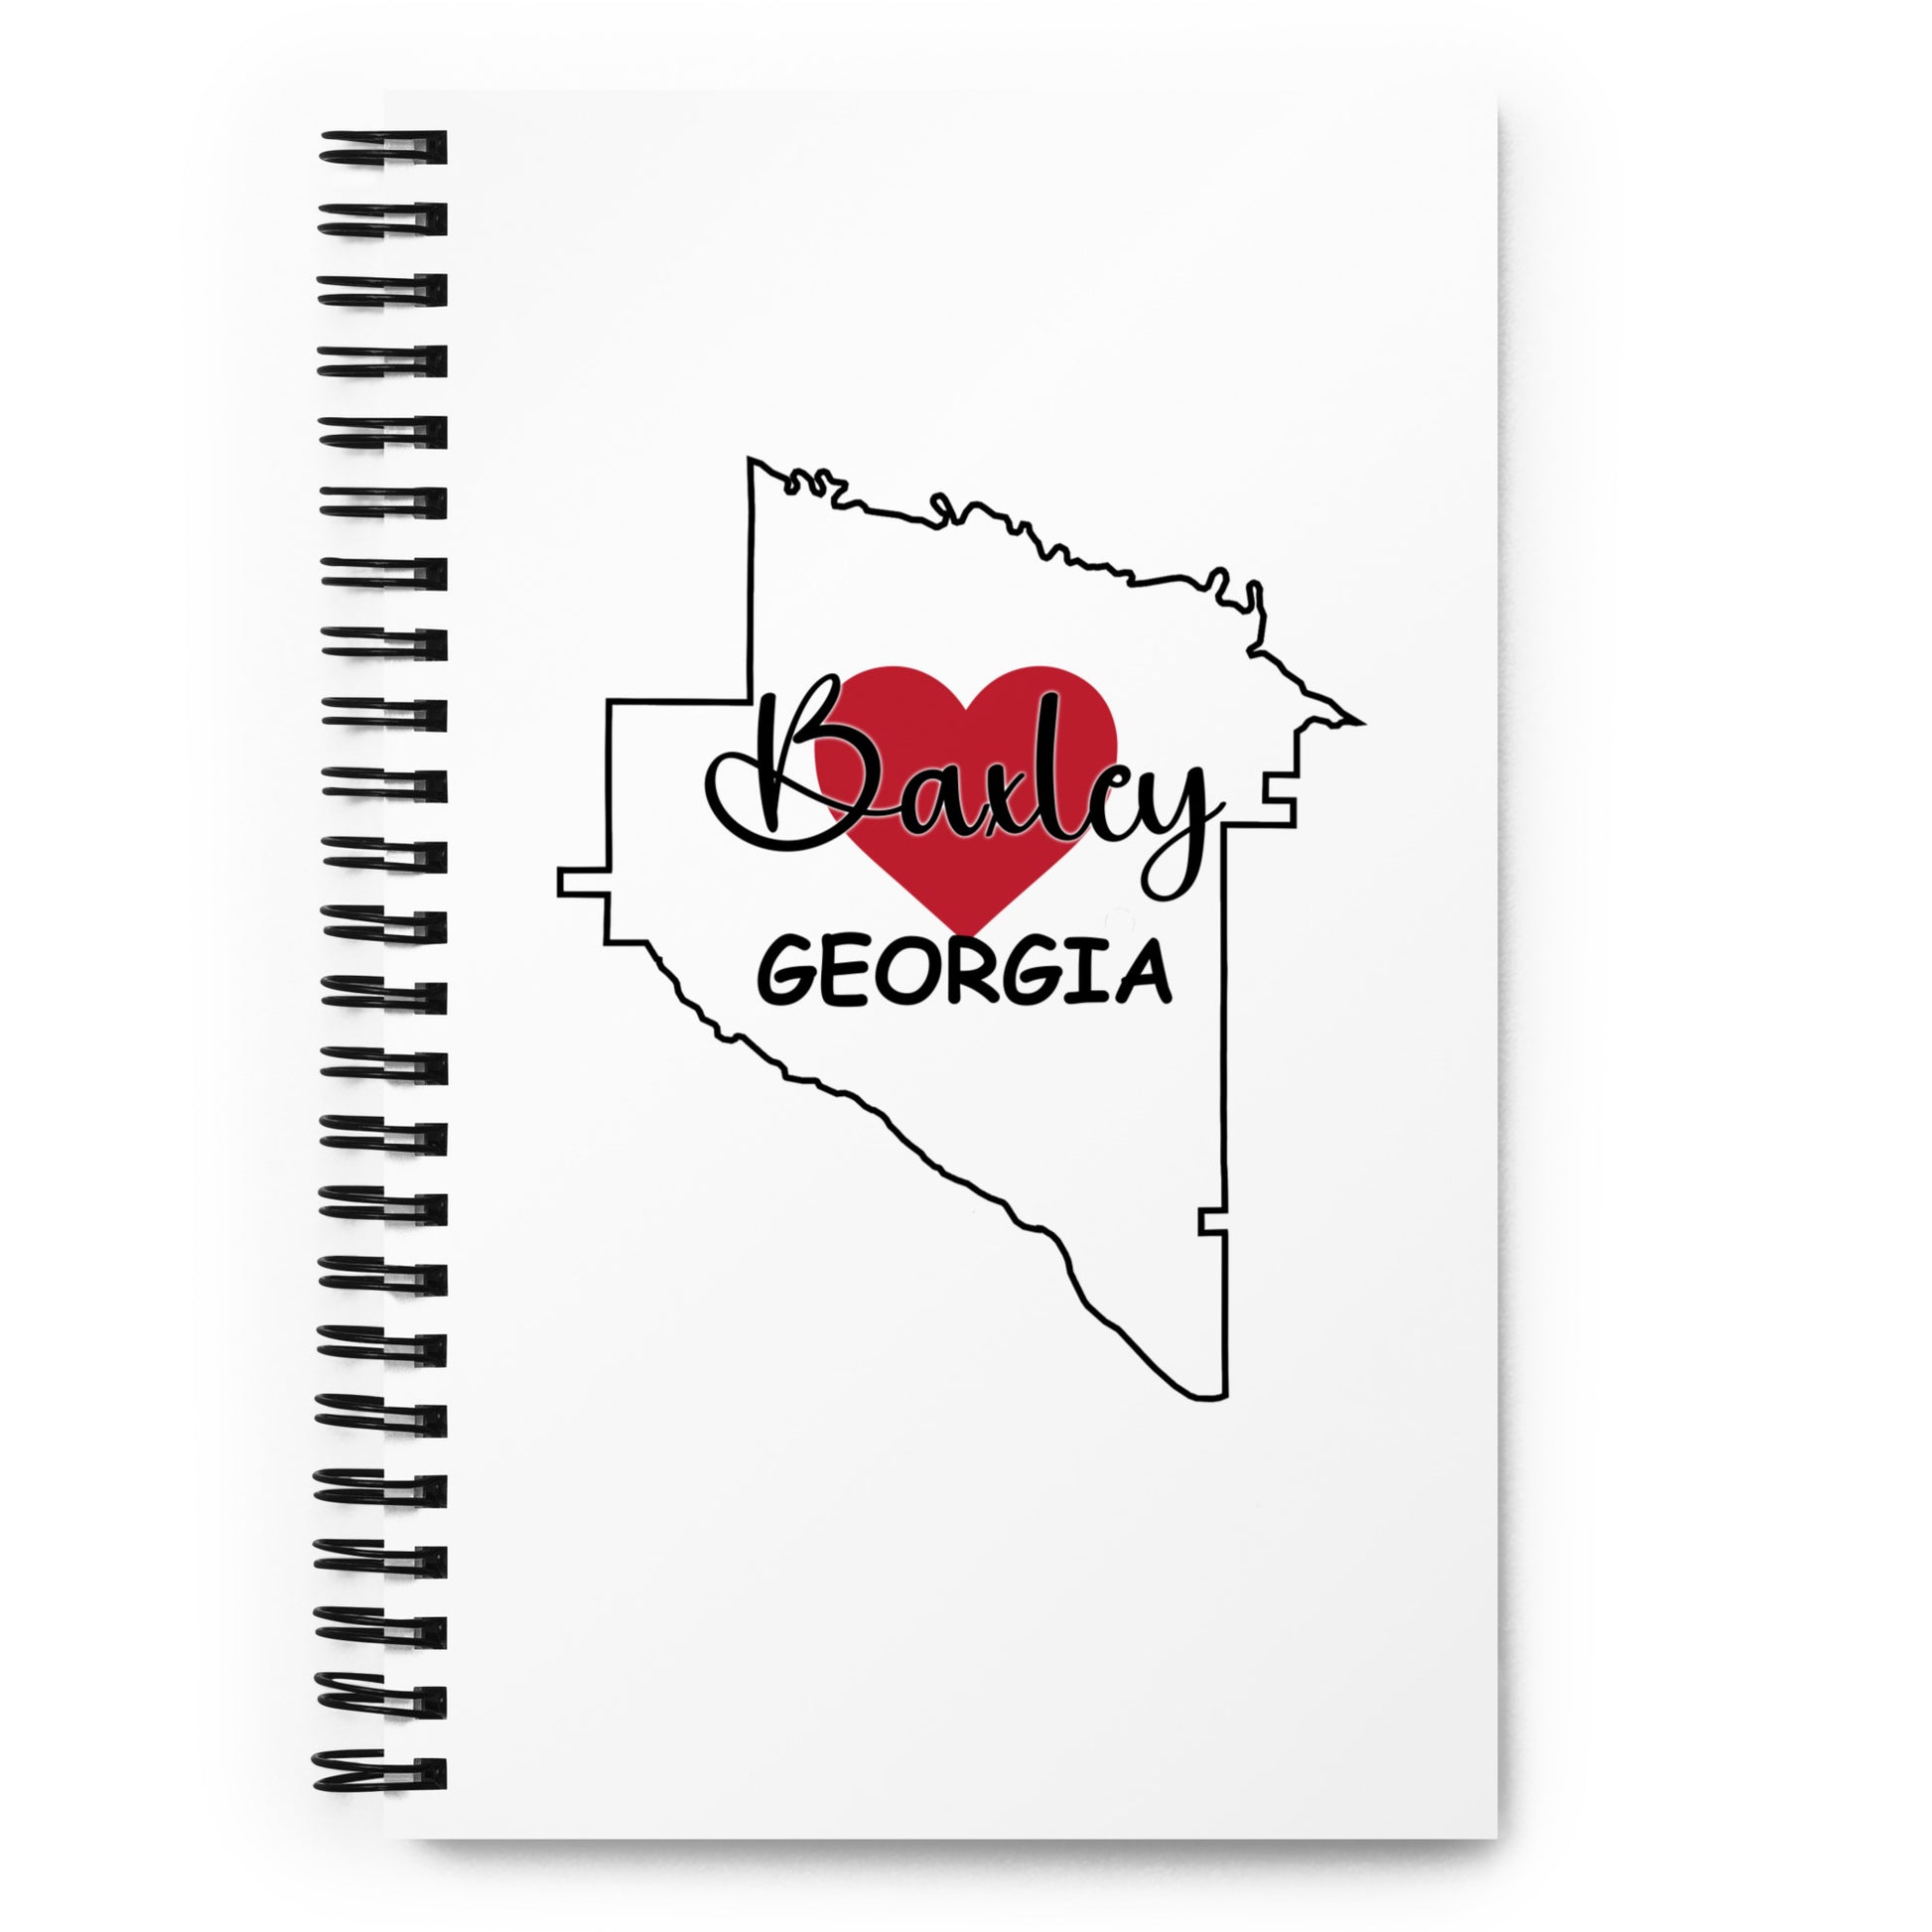 Baxley Georgia Heart in County Outline Spiral Notebook Journal Diary